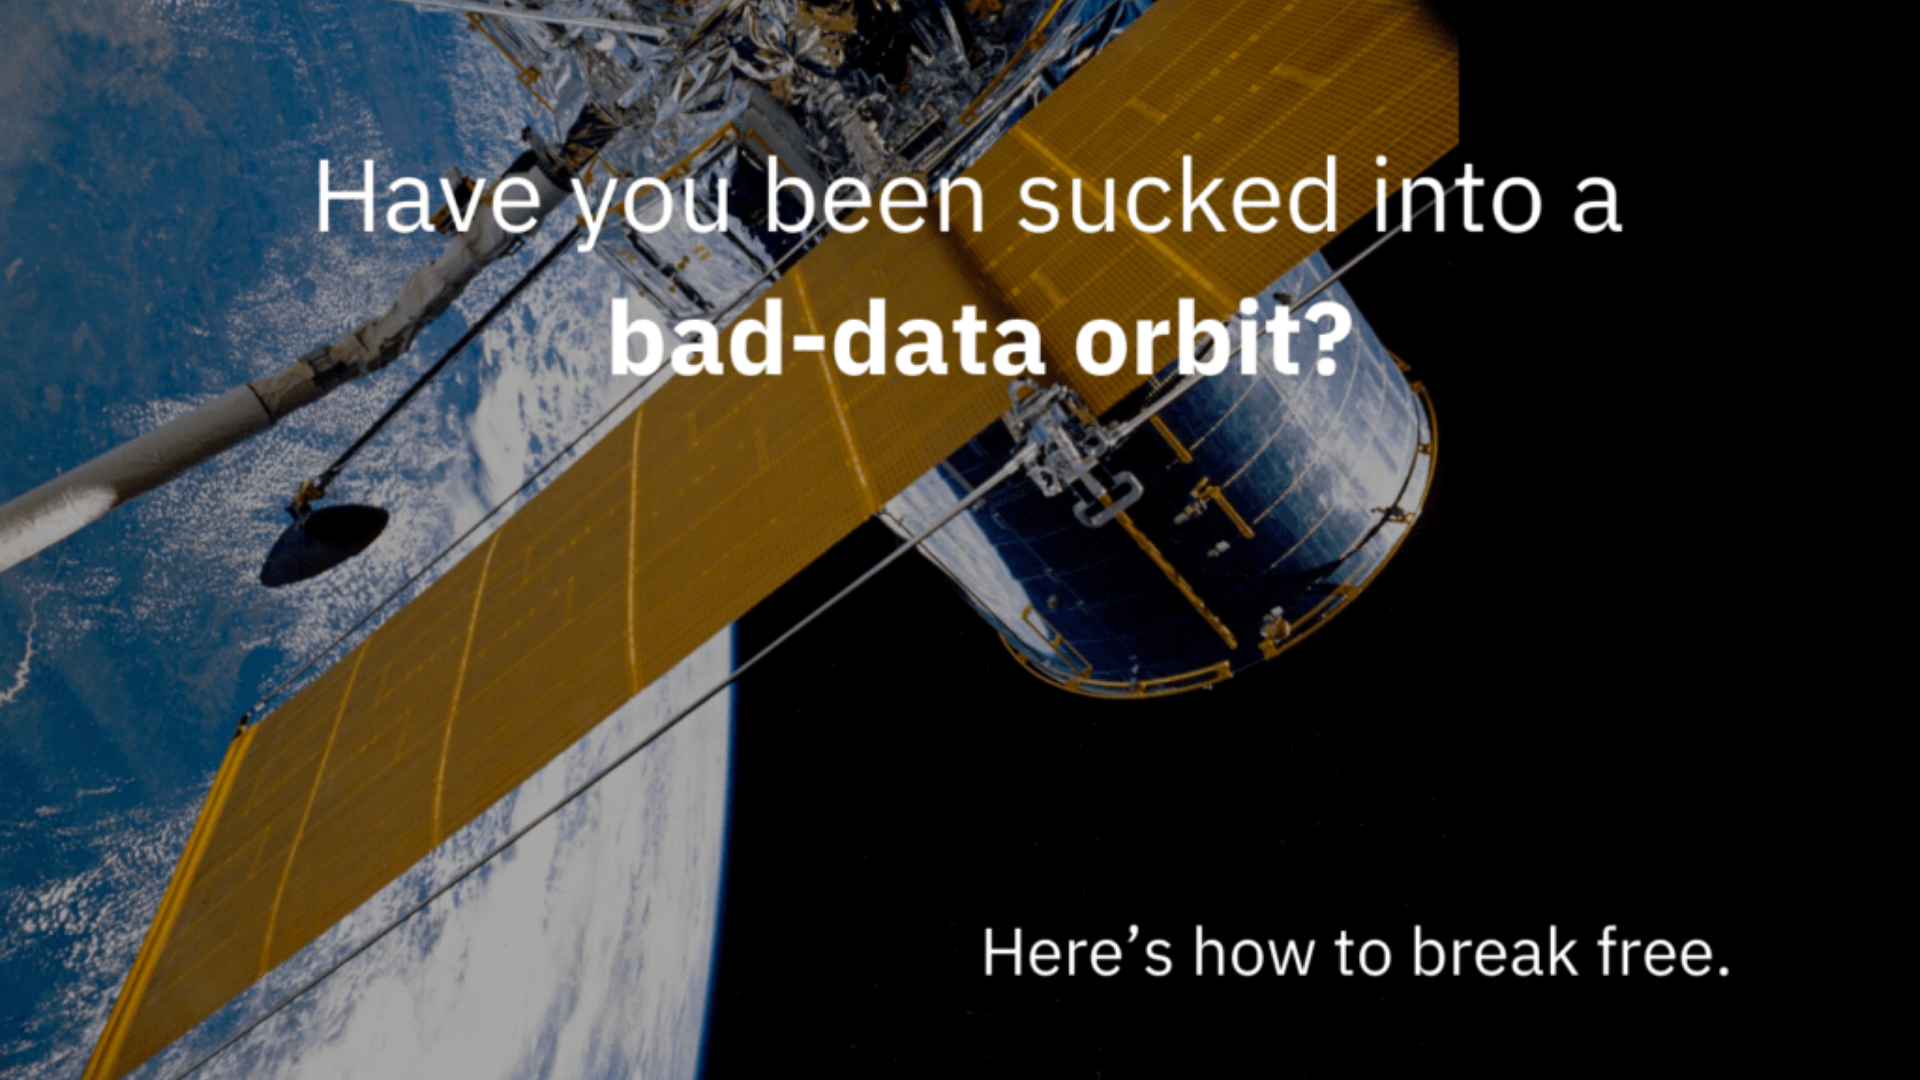 Have you been sucked into a bad-data orbit? Here’s how to break free.